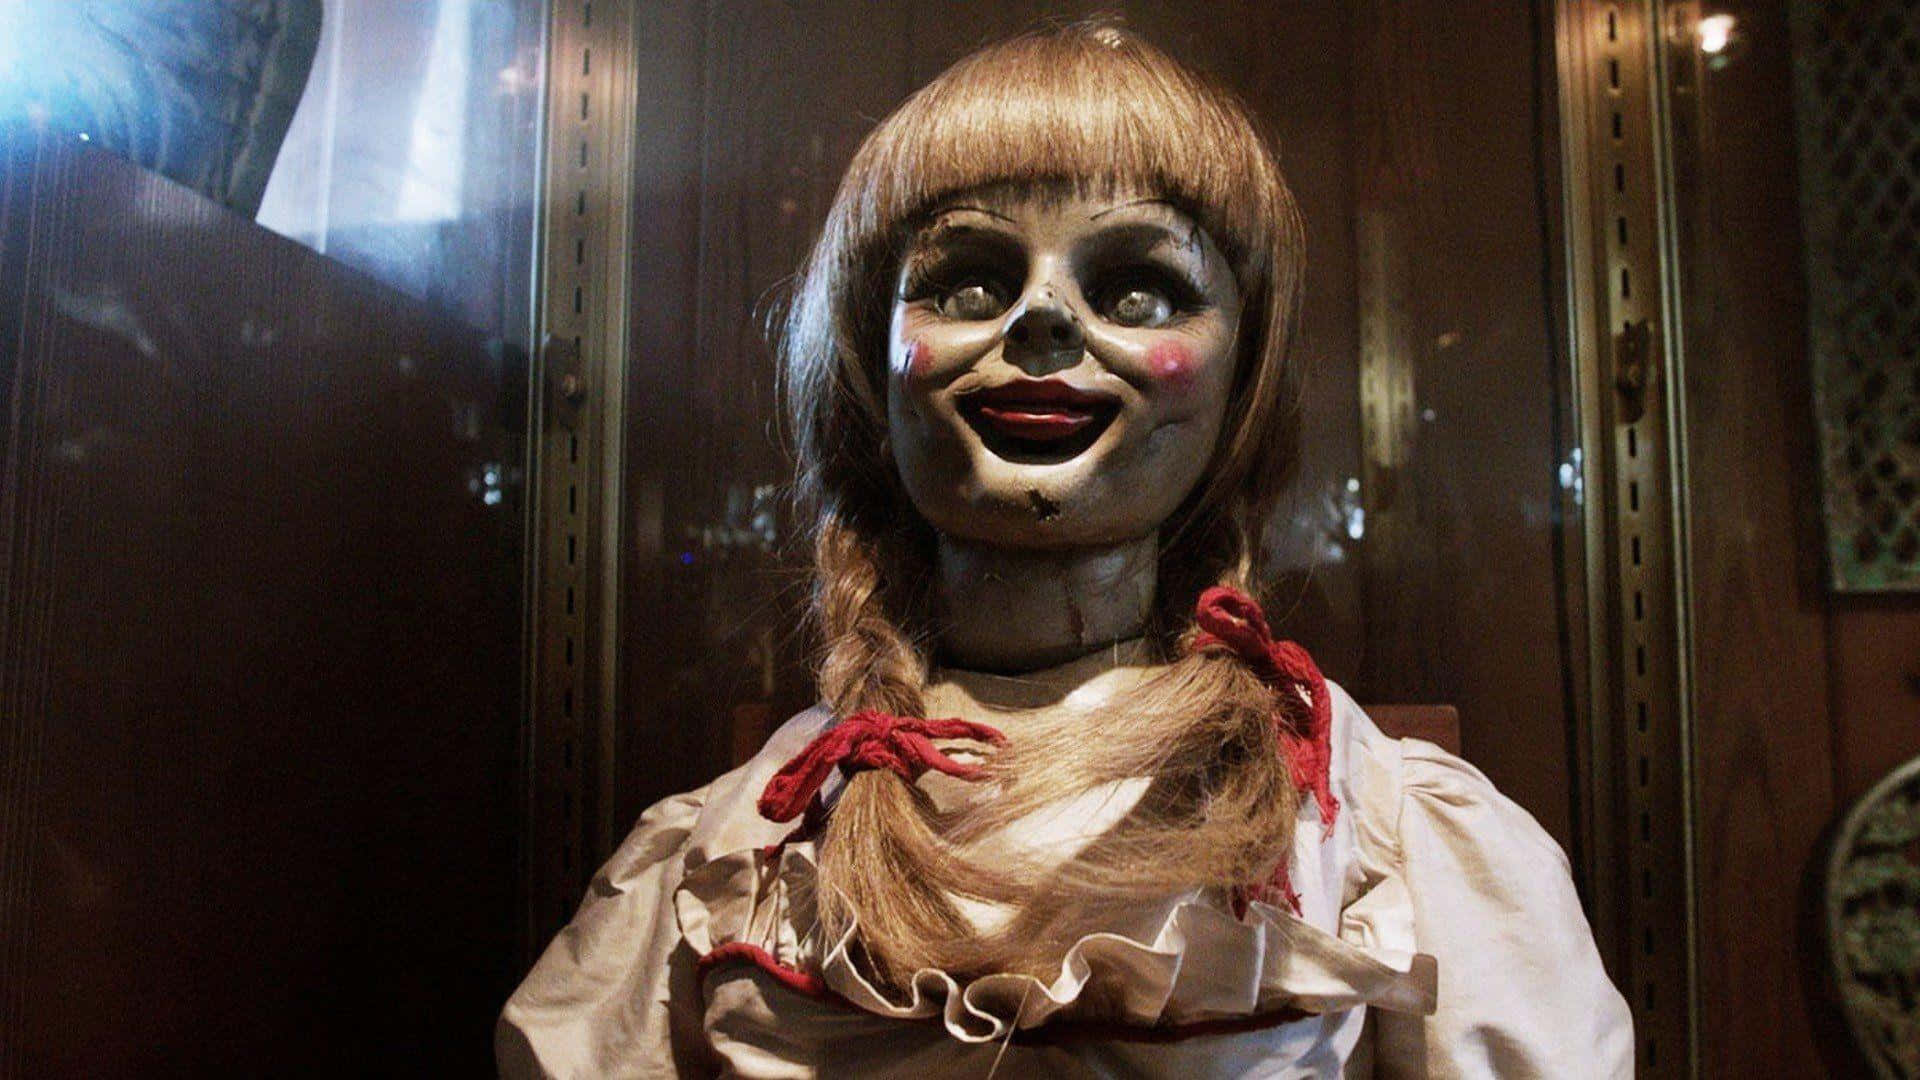 "Discover the terrifying truth behind the supernatural horror behind Annabelle."